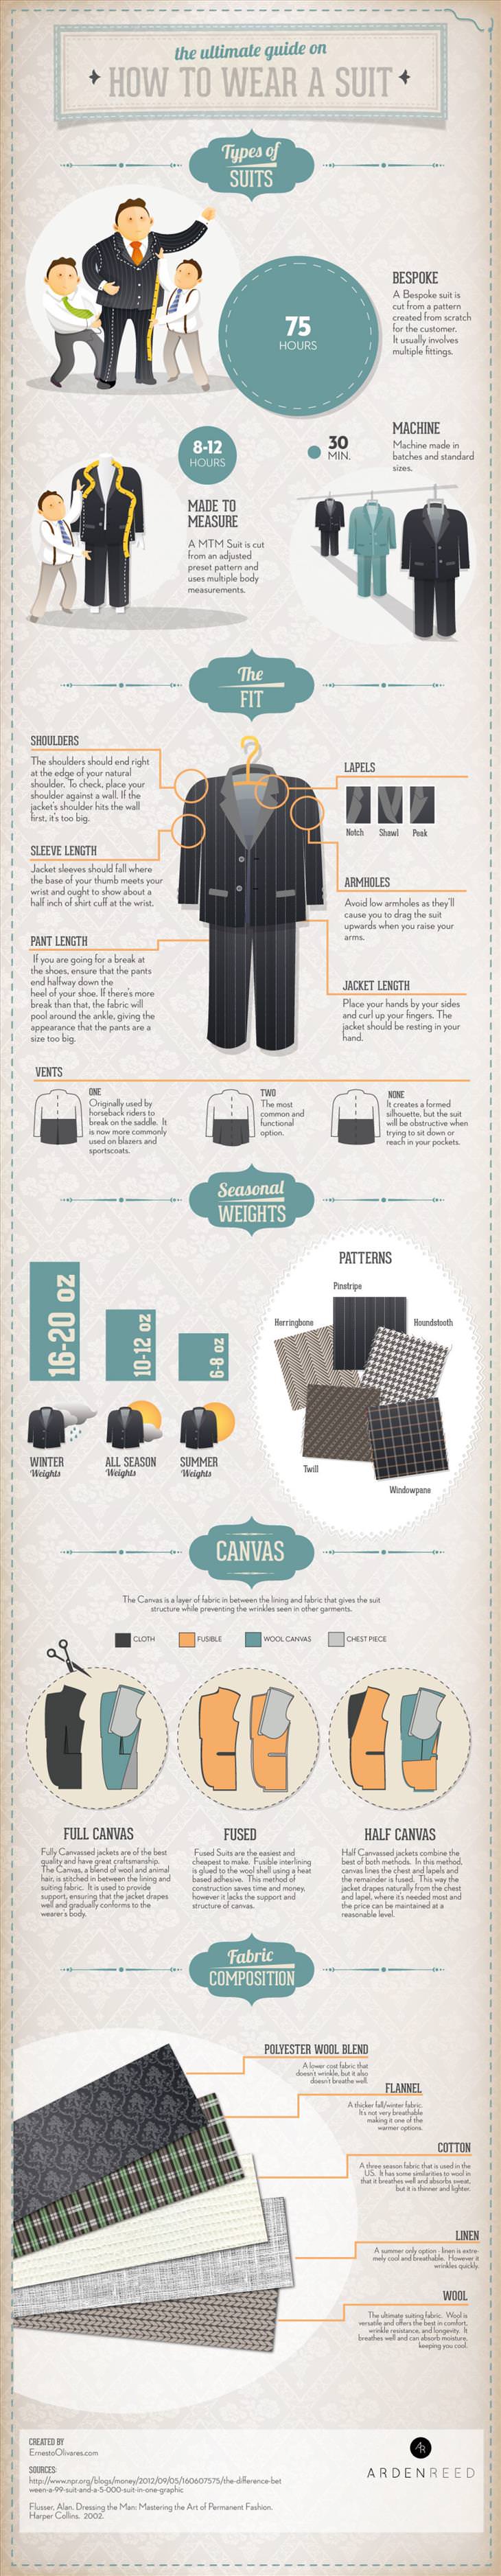 wearing a suit infographic